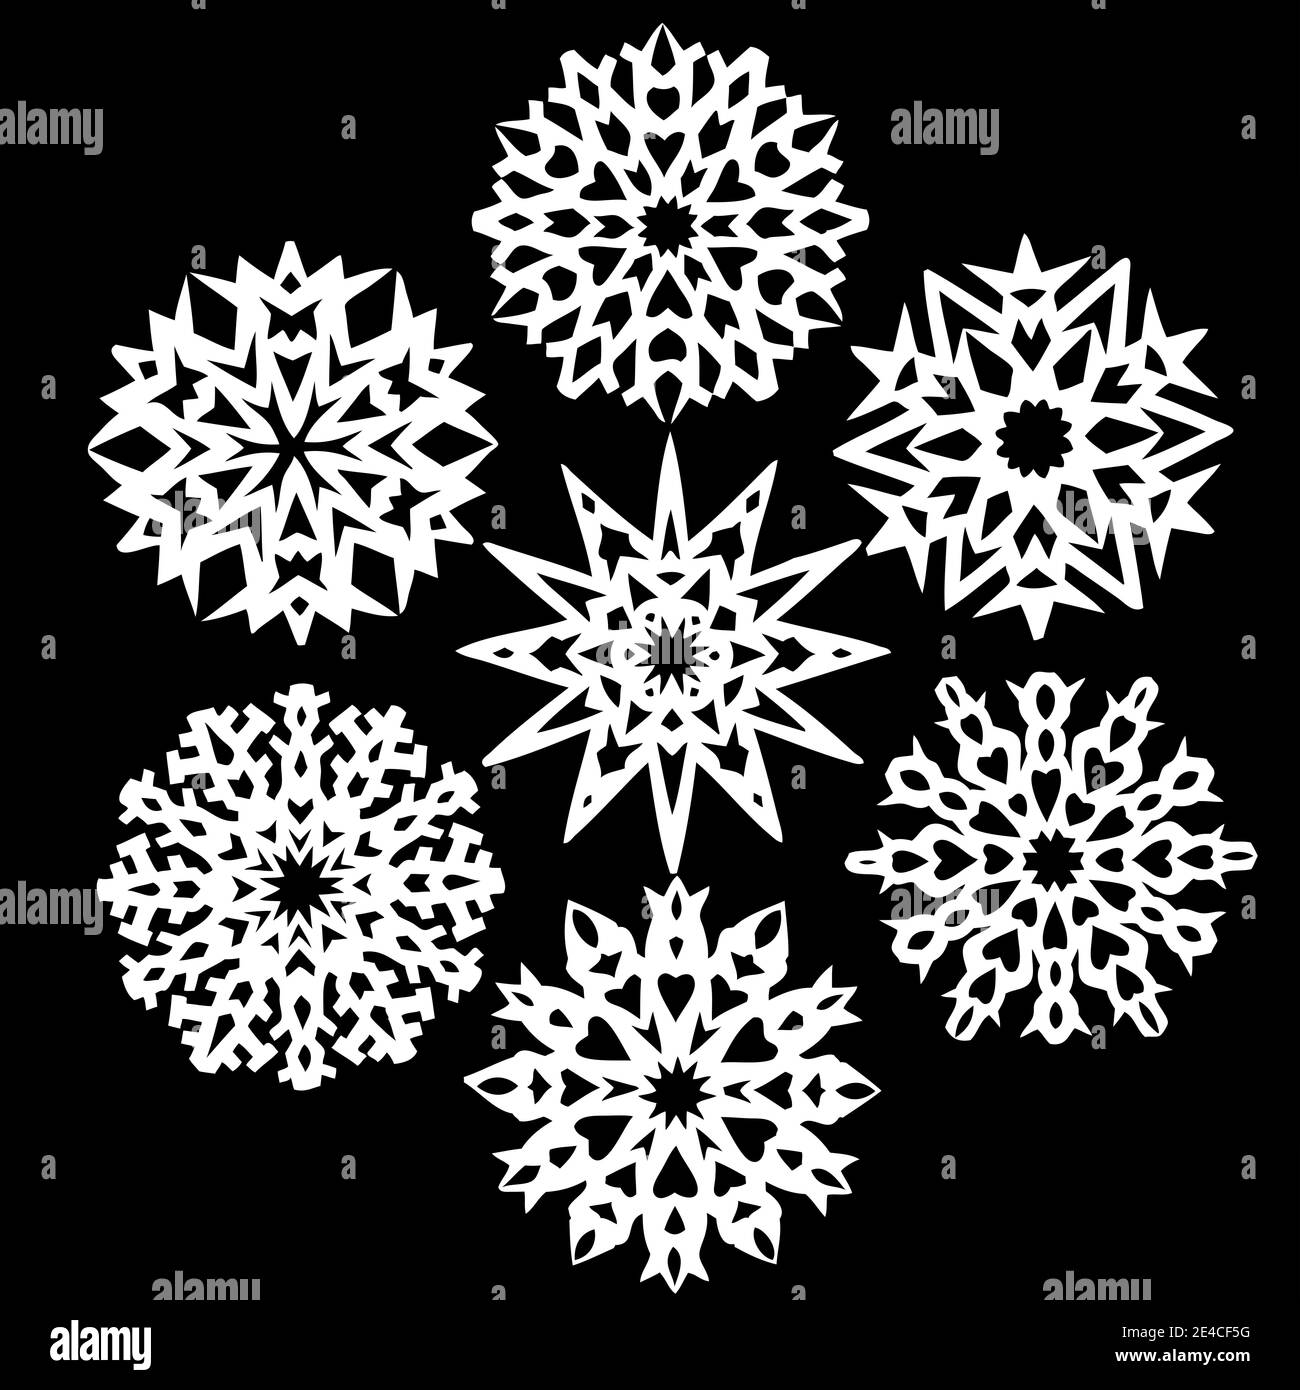 Different snowflakes as paper cut in black and white Stock Photo